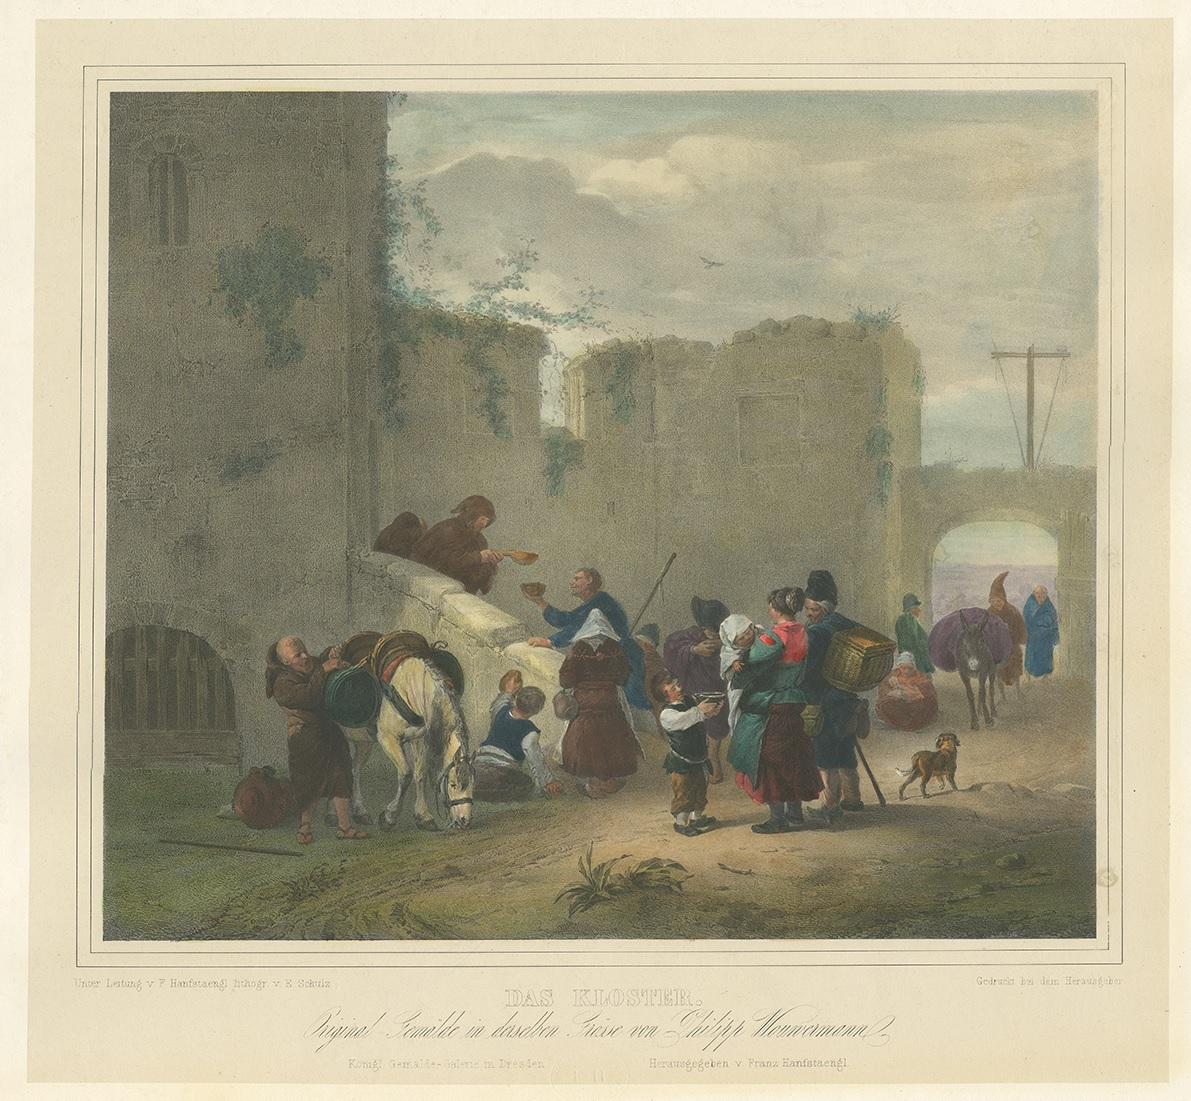 Antique print titled 'Das Kloster'. Lithograph, on chine collé, depicting travellers halting at a convent. Published after a painting by P. Wouwerman.